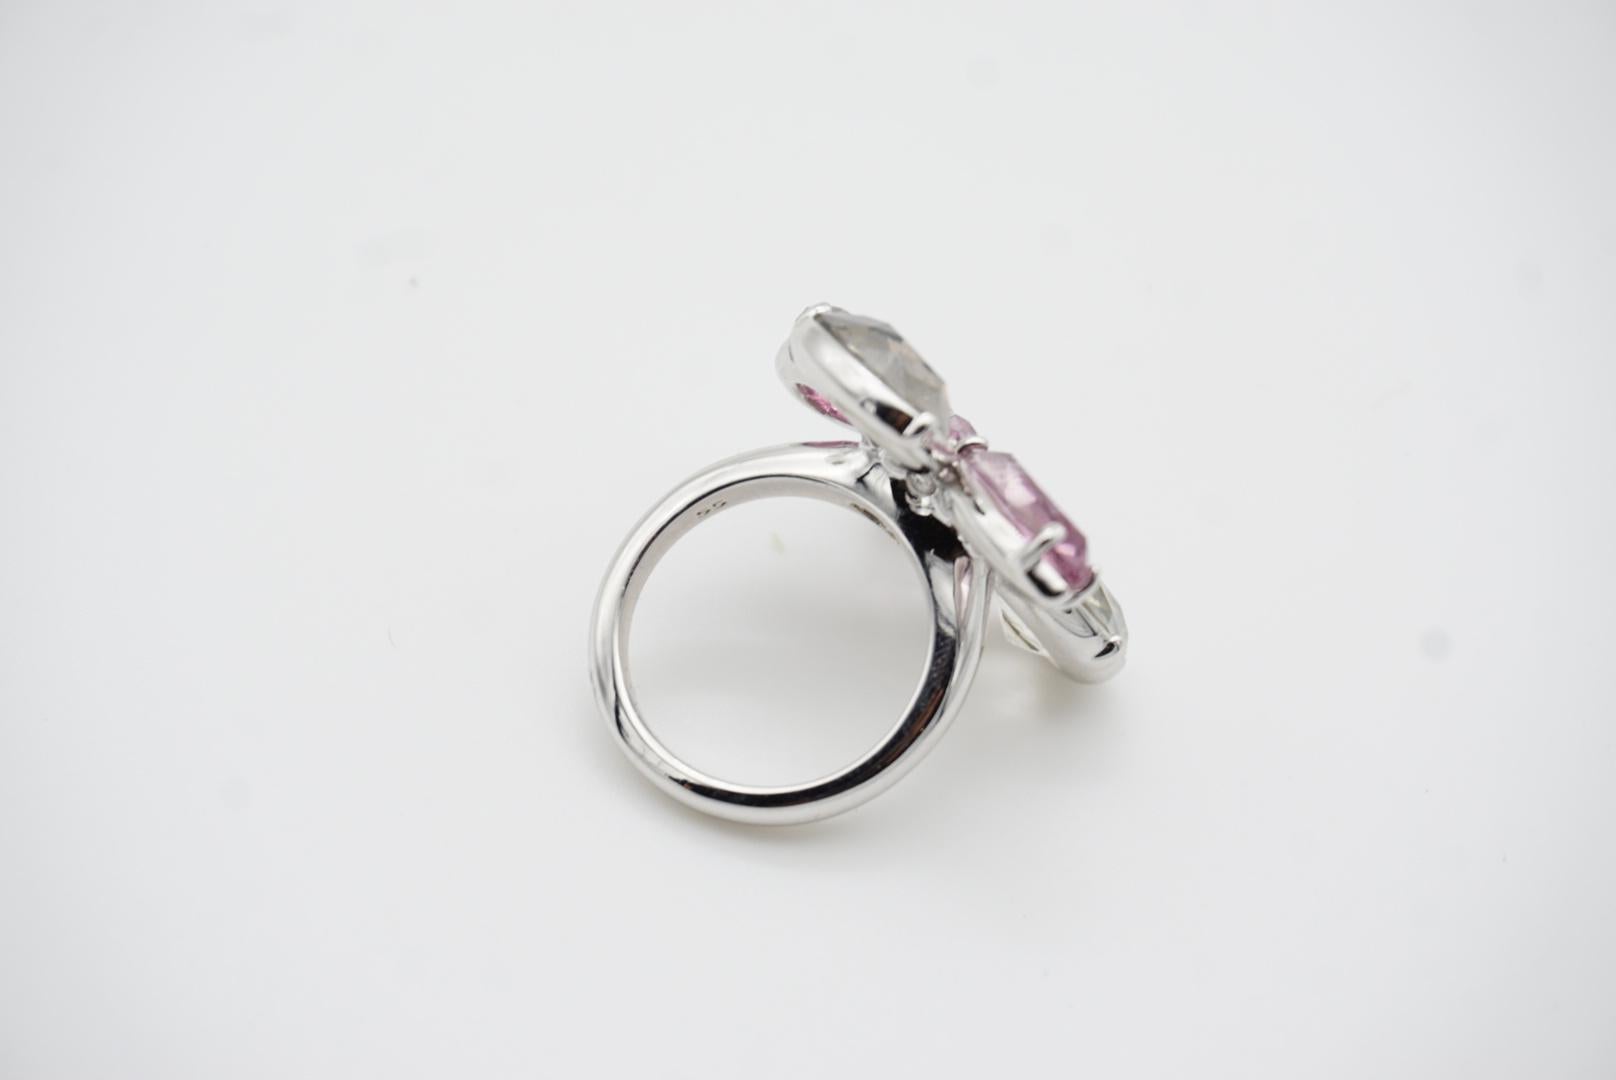 Swarovski Nirvana Cocktail Clear Purple Crystal Flower Ring, Silver, Size 55 For Sale 5